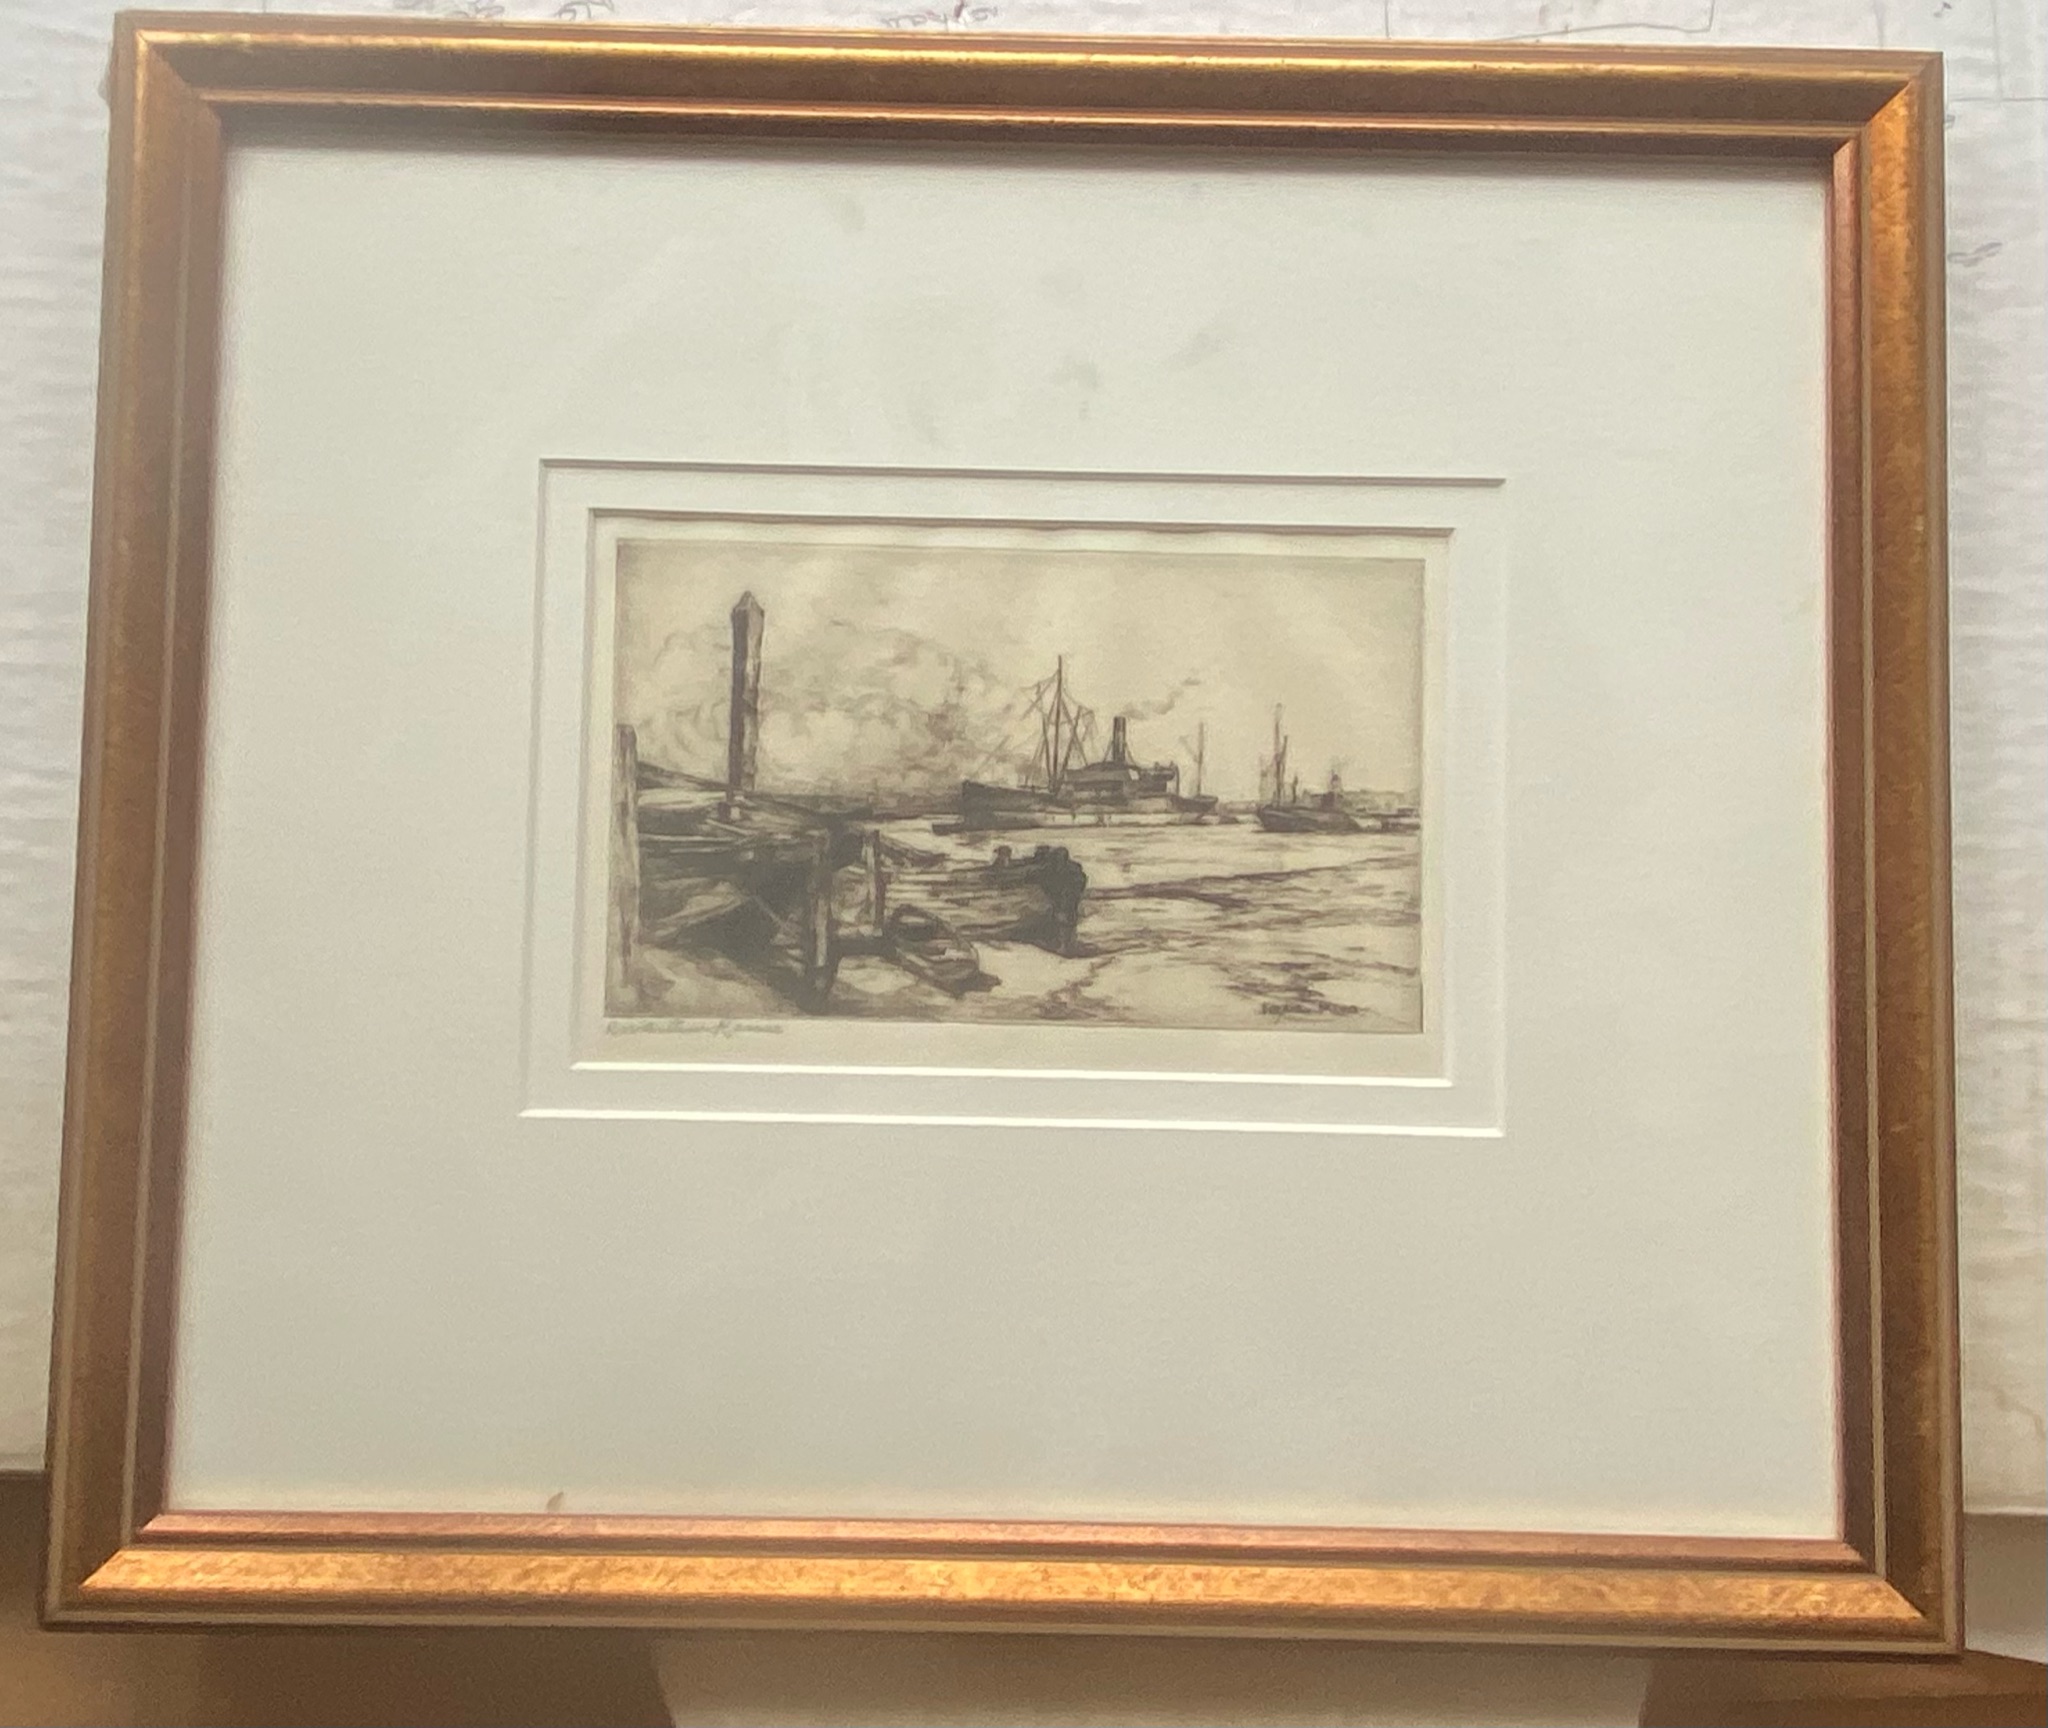 Robert William Arthur Rouse RBA fl. 1882-1929 Signed Etching 'Steamer' - Image 4 of 5